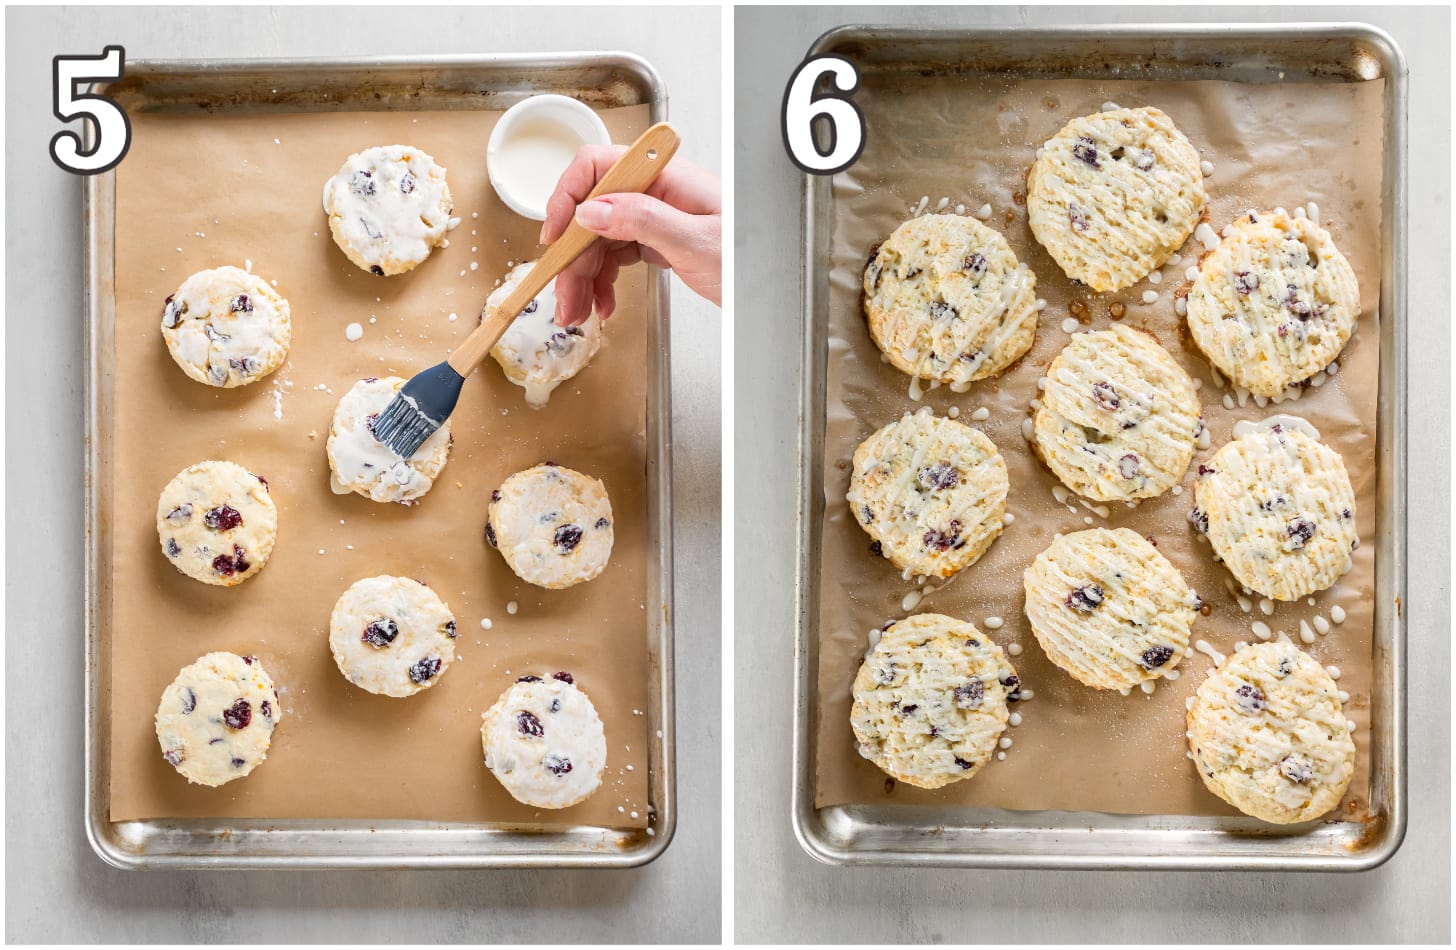 photo collage demonstrating how to brush unbaked scones with cream and drizzle orange glaze on baked scones.